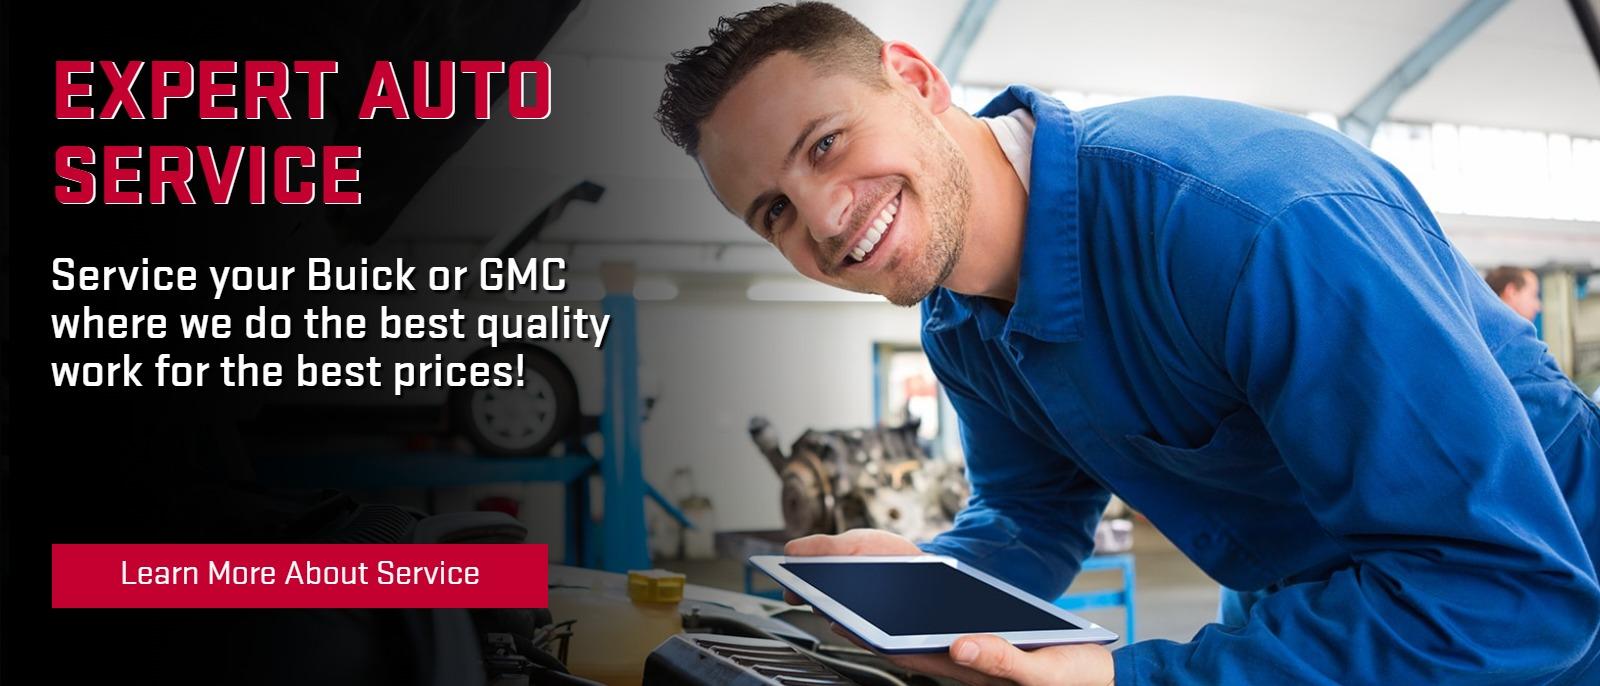 Expert Auto Service
Service your Buick or GMC where we do the best quality work for the best prices!